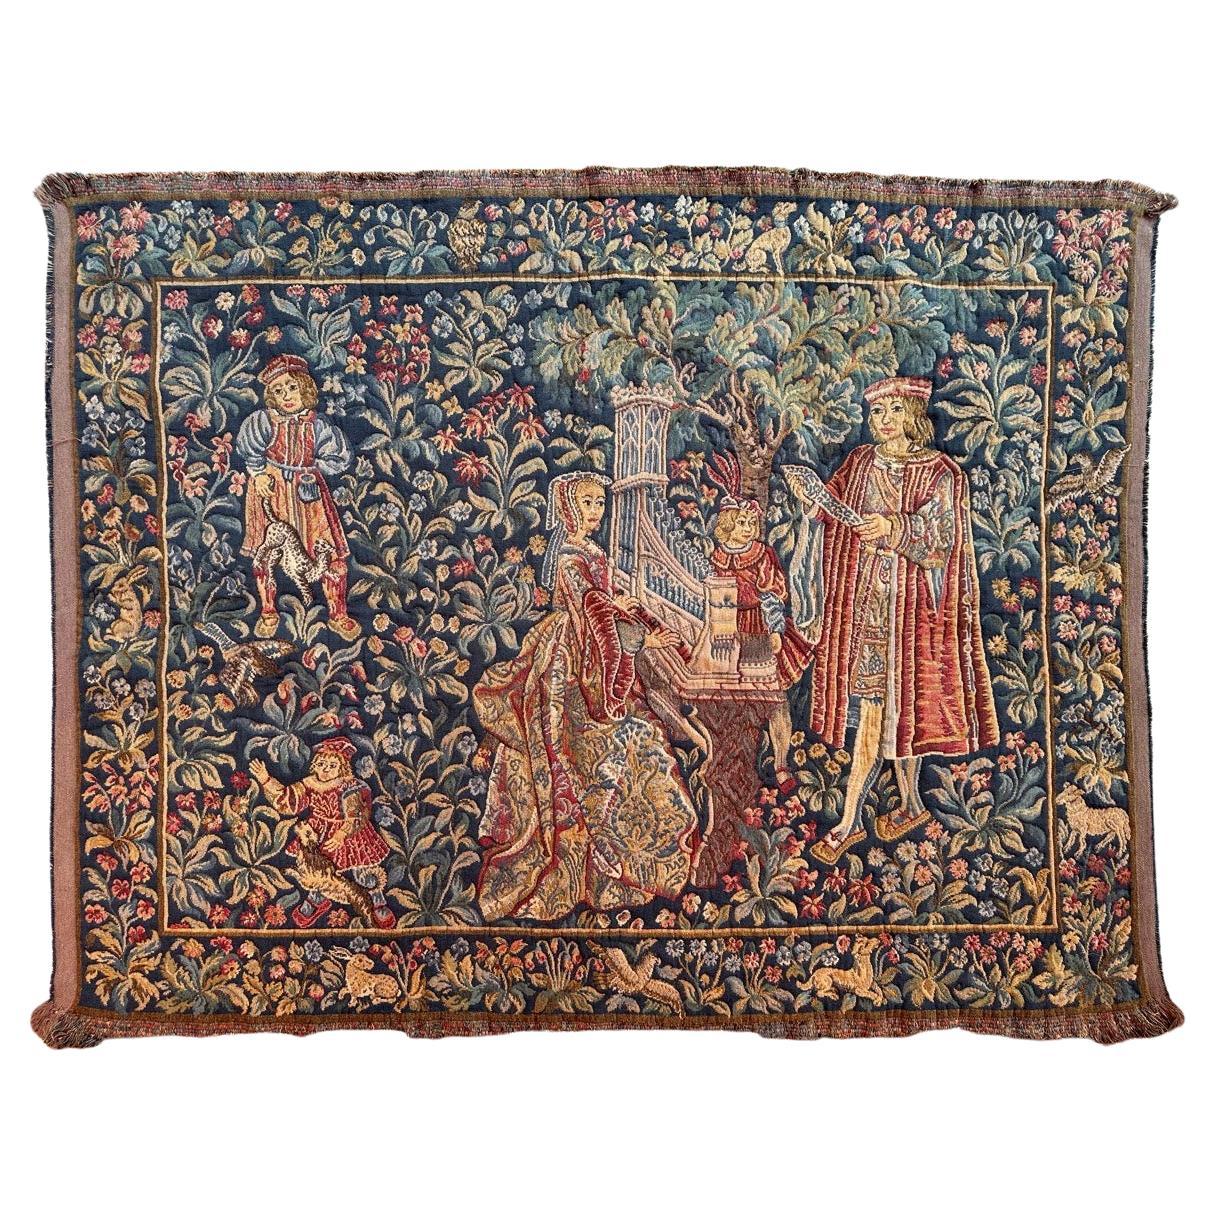 Bobyrug’s Nice Vintage Aubusson Style Jaquar Tapestry with Medieval Museum Desig